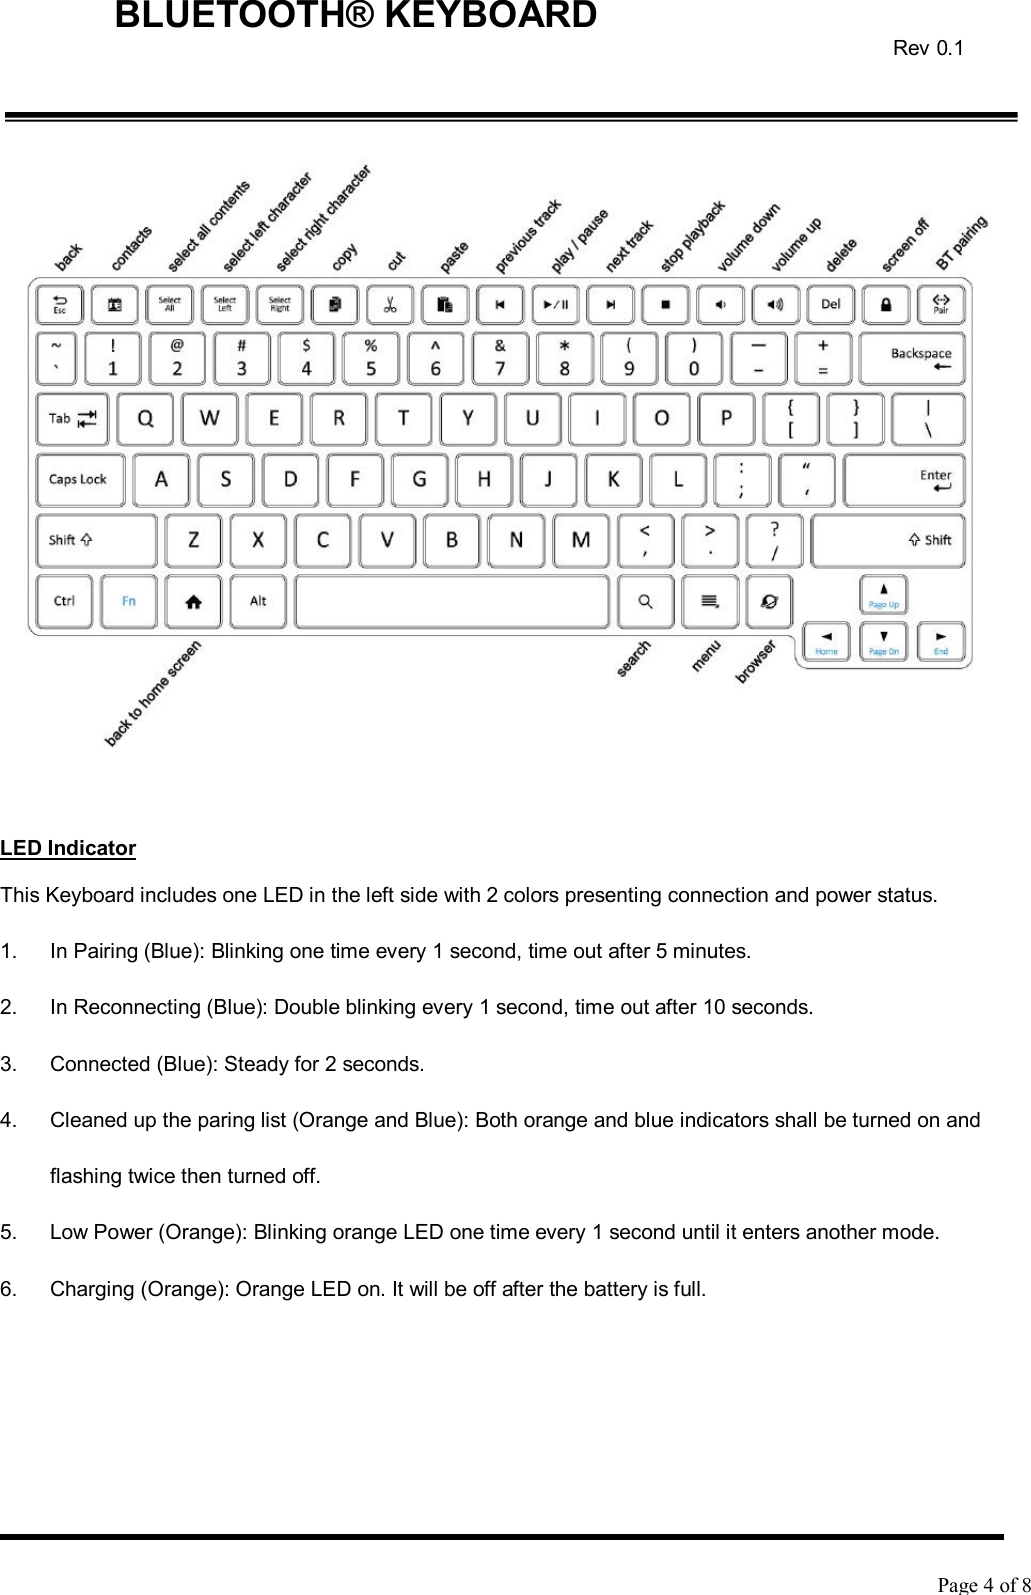    Page 4 of 8  BLUETOOTH® KEYBOARD Rev 0.1   LED Indicator This Keyboard includes one LED in the left side with 2 colors presenting connection and power status. 1.  In Pairing (Blue): Blinking one time every 1 second, time out after 5 minutes. 2.  In Reconnecting (Blue): Double blinking every 1 second, time out after 10 seconds. 3.  Connected (Blue): Steady for 2 seconds. 4.  Cleaned up the paring list (Orange and Blue): Both orange and blue indicators shall be turned on and flashing twice then turned off. 5.  Low Power (Orange): Blinking orange LED one time every 1 second until it enters another mode.  6.  Charging (Orange): Orange LED on. It will be off after the battery is full.    